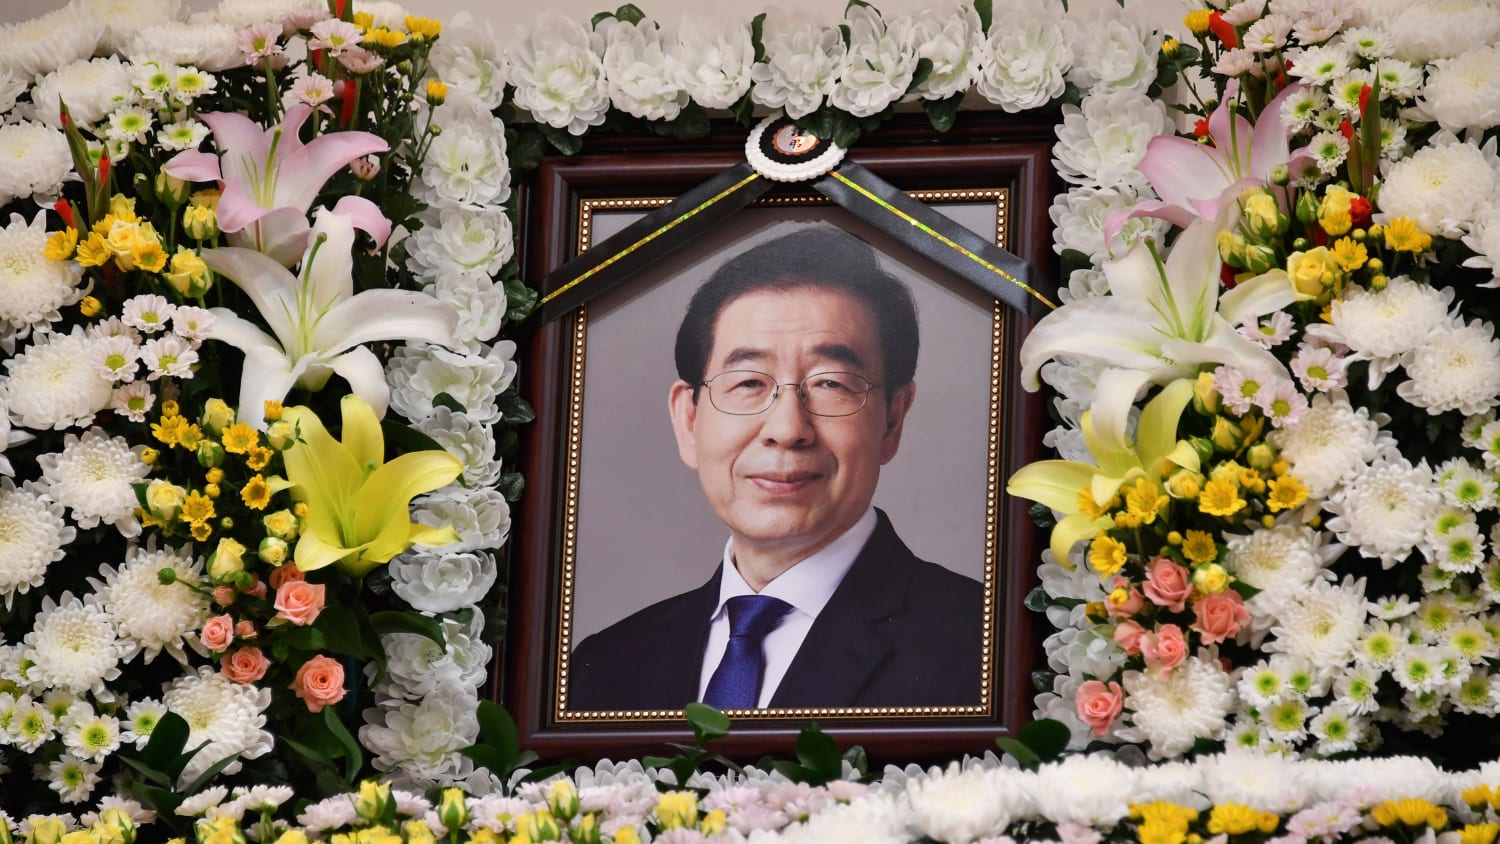 Seoul Mayor Park Won-soon found dead, left note saying 'sorry to all people'